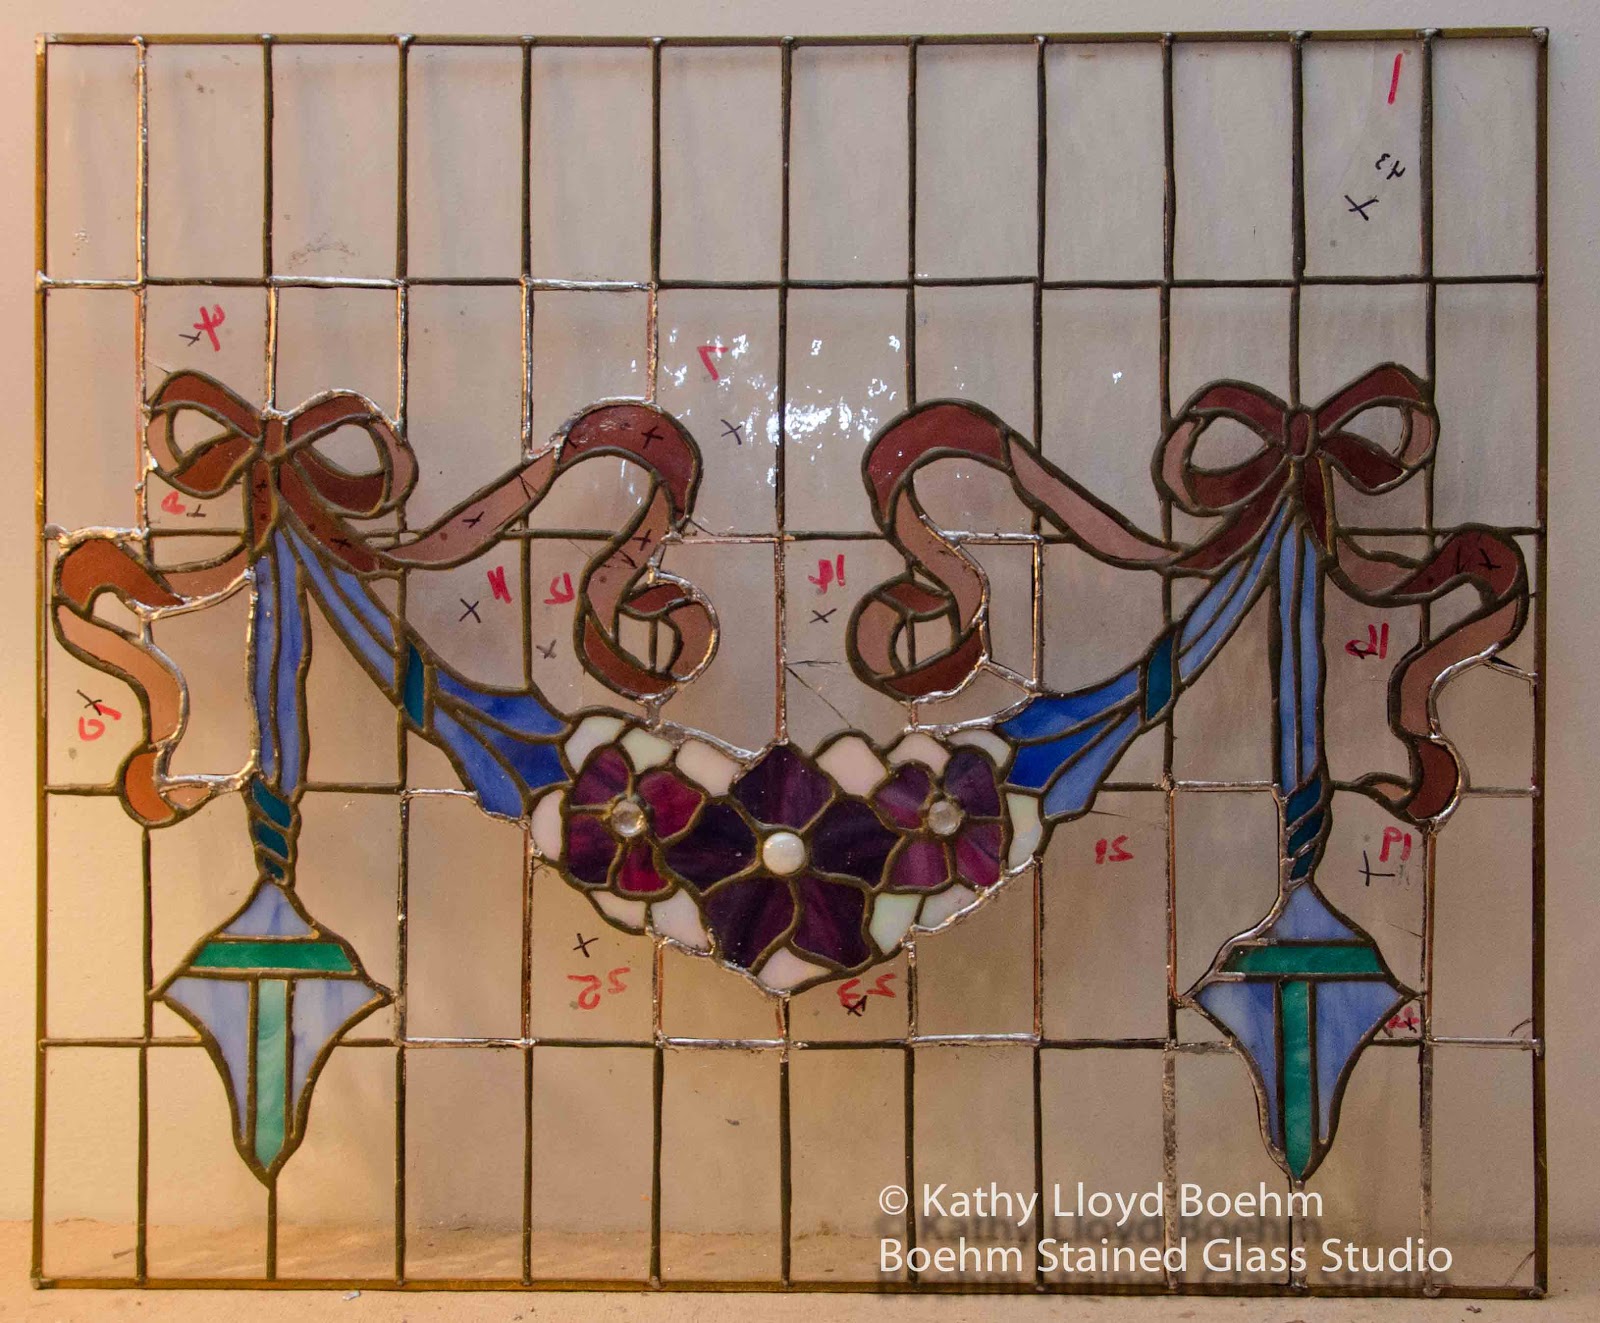 Boehm Stained Glass Blog: Repairs to Stained Glass Rainbow Panel